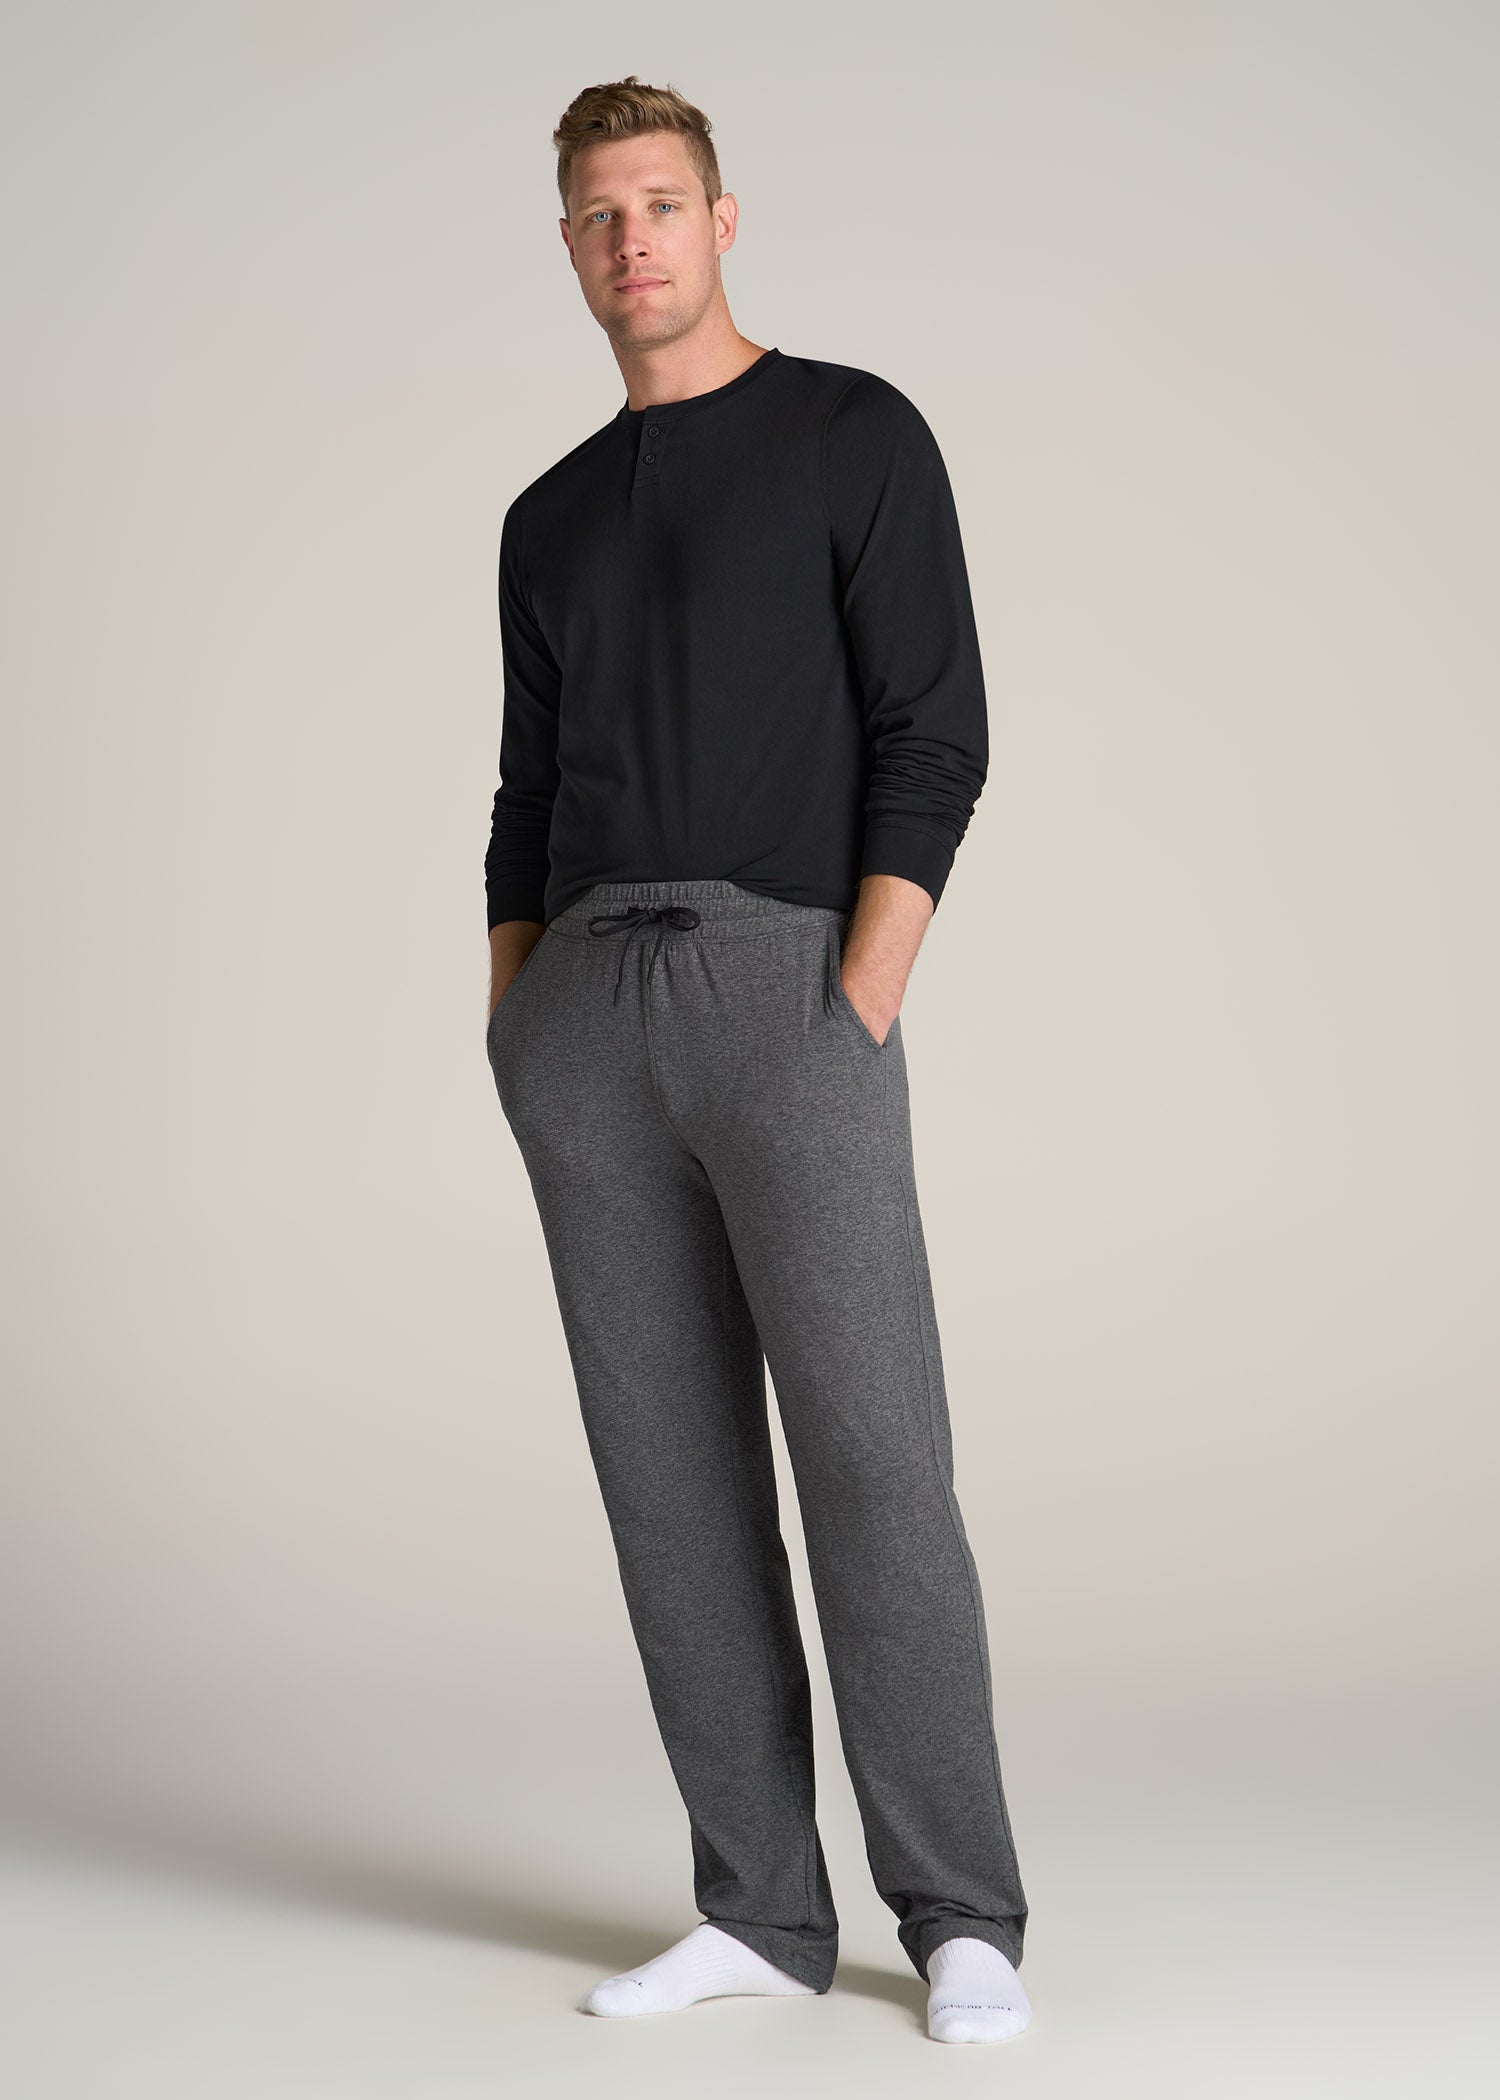 A.T. Performance Zip Bottom Pants for Tall Men in Charcoal Mix